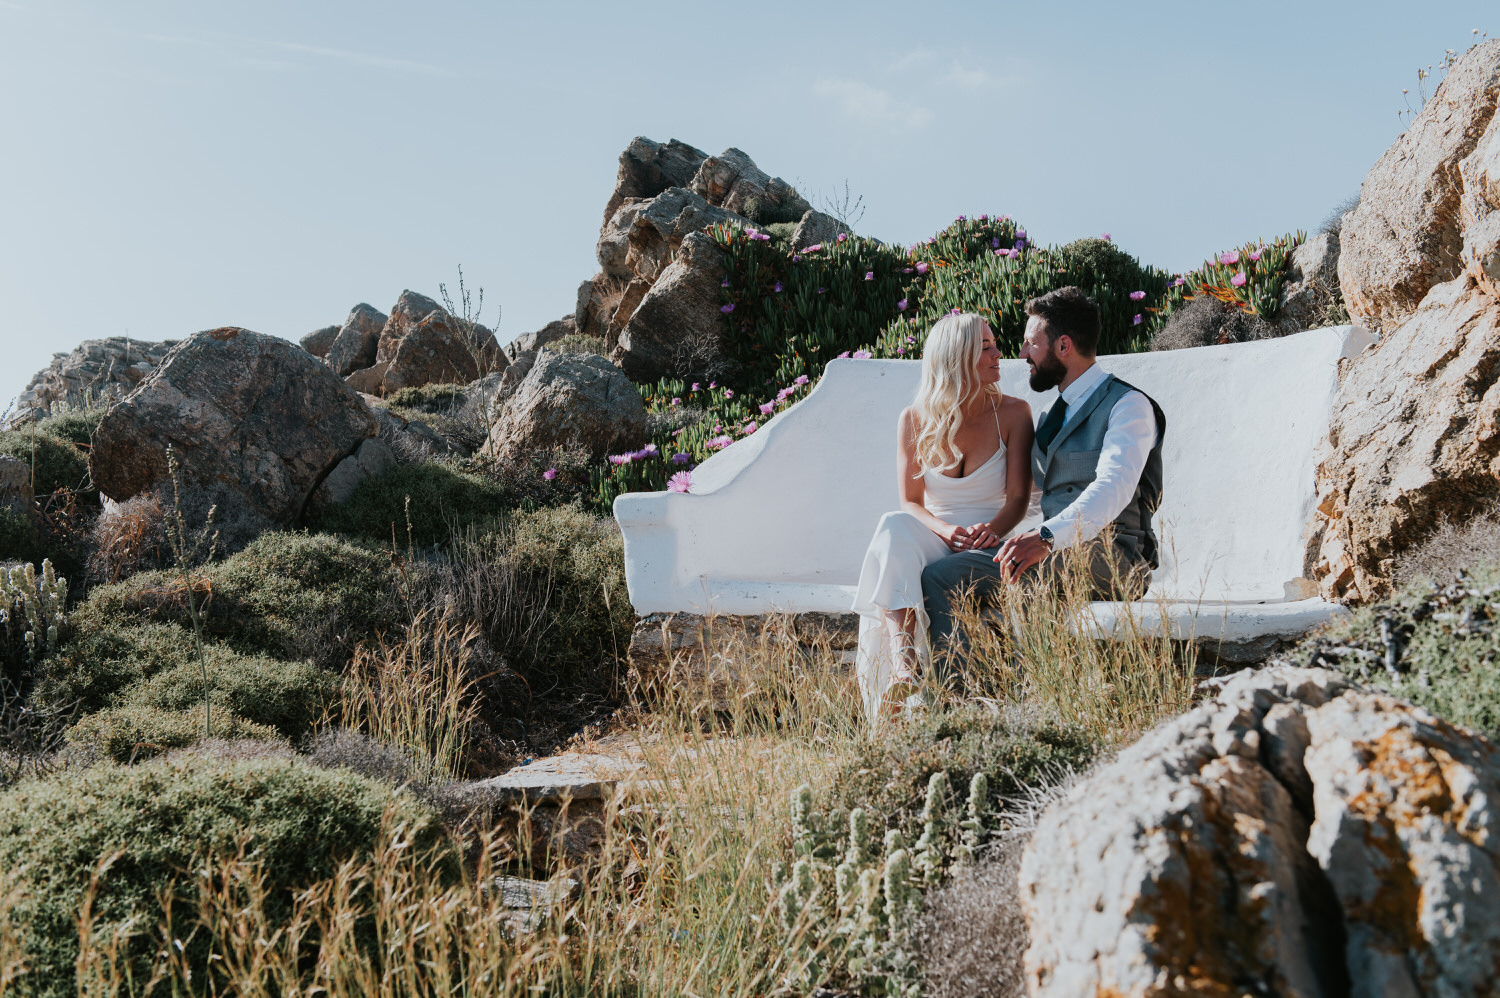 Mykonos wedding photographer: bride and groom sat on a bench nestled in the rocks looking at each other in the afternoon light.